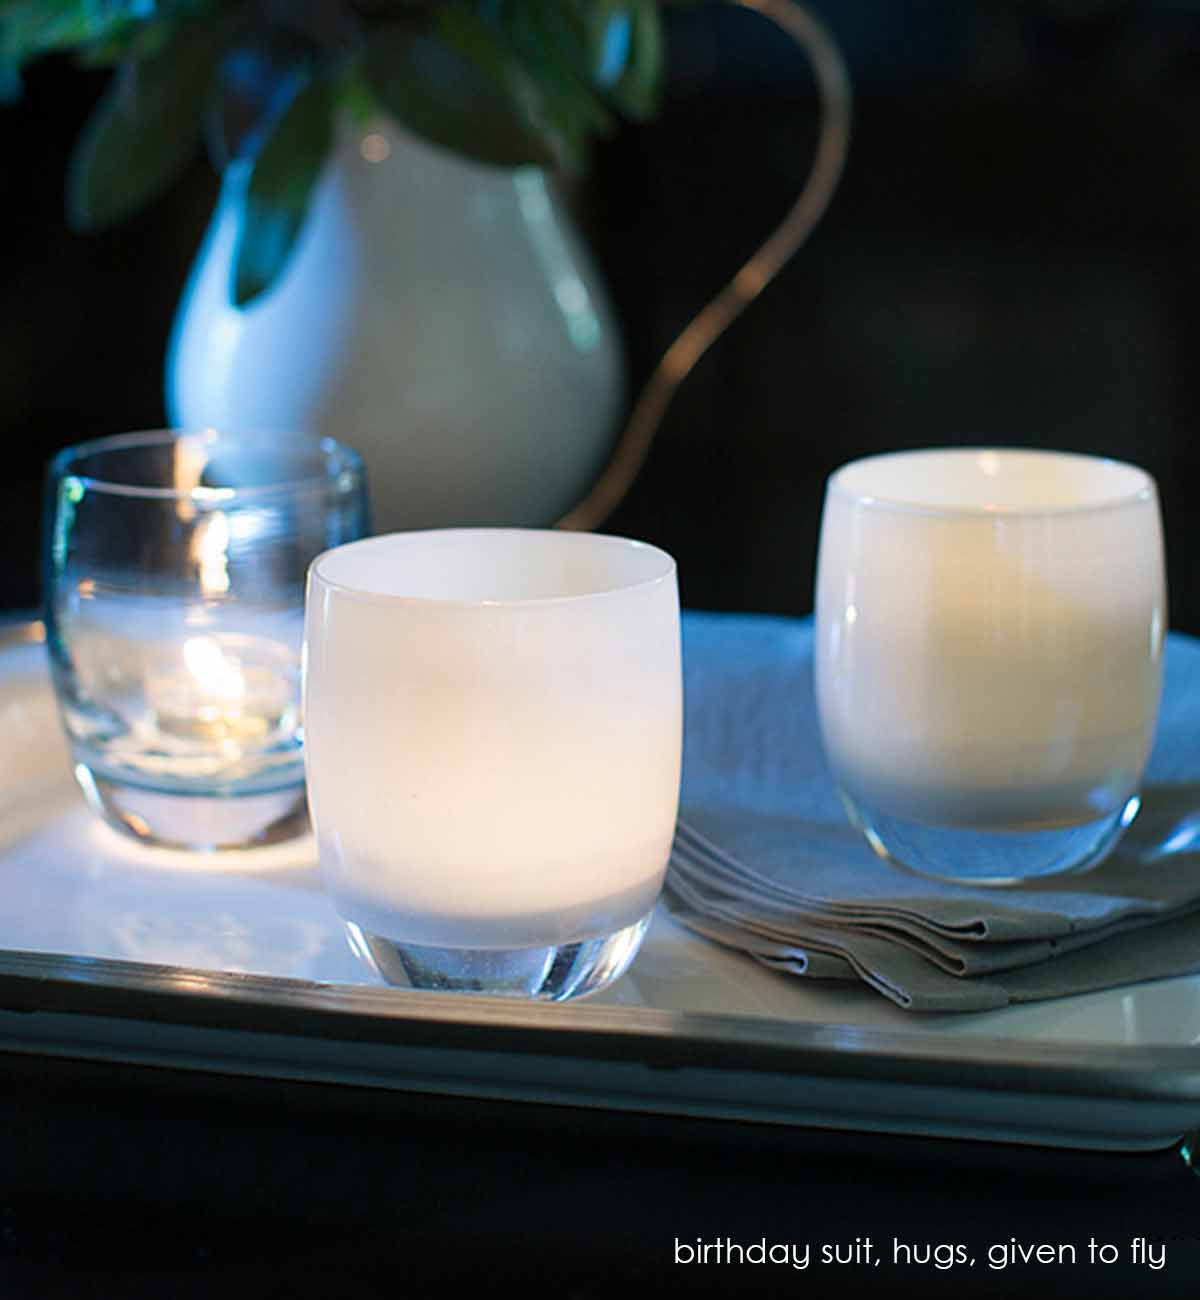 given to fly, sea salt, hand-blown glass votive candle holder. Paired with birthday suit and hugs.